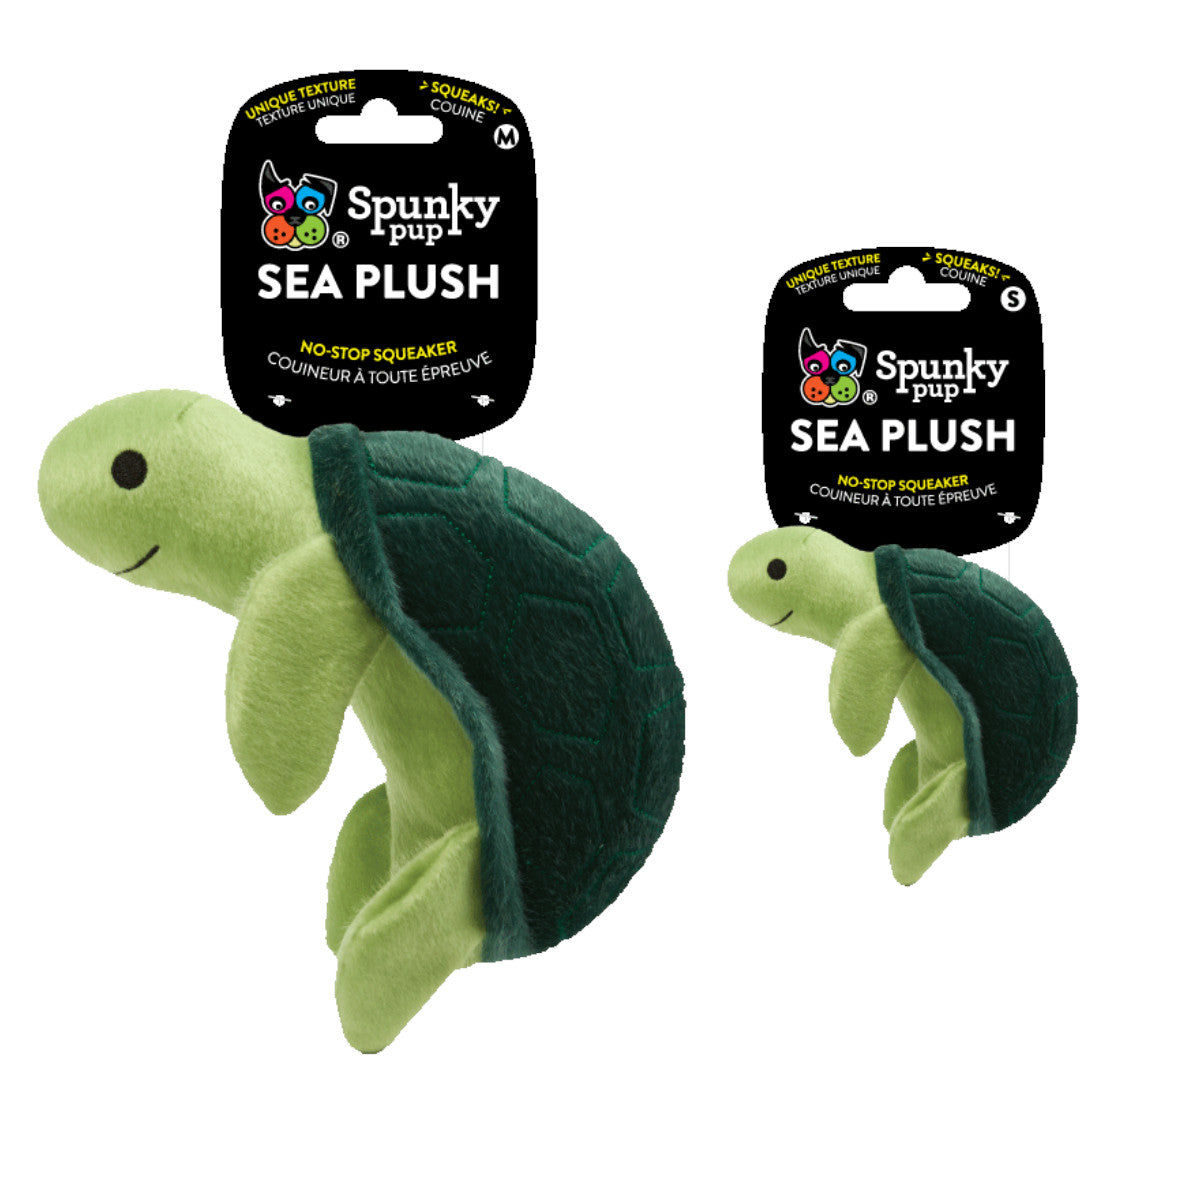 Spunky Pup Sea Plush Turtle Dog Toy, with Squeaker, Small and Medium